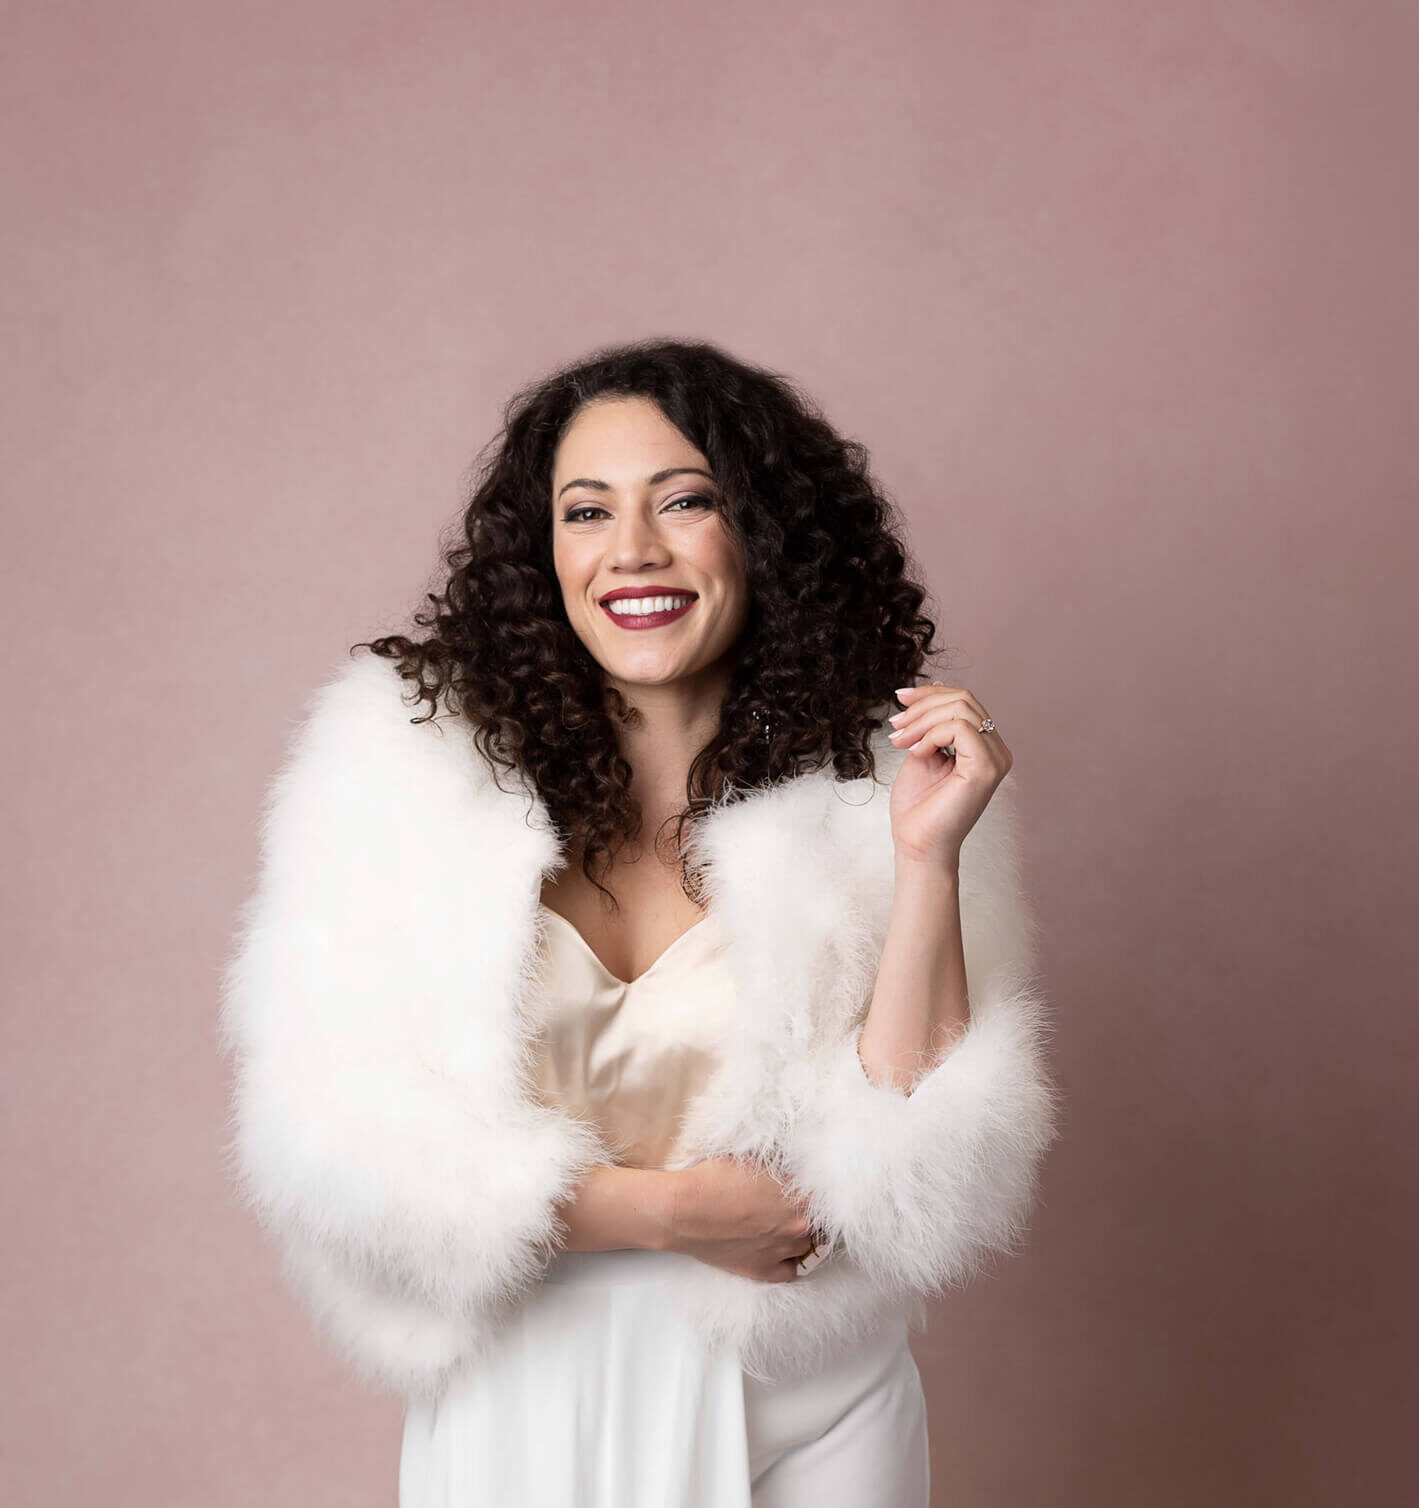 A happy woman with curly dark hair stands in a studio in white pants and a fur sweater